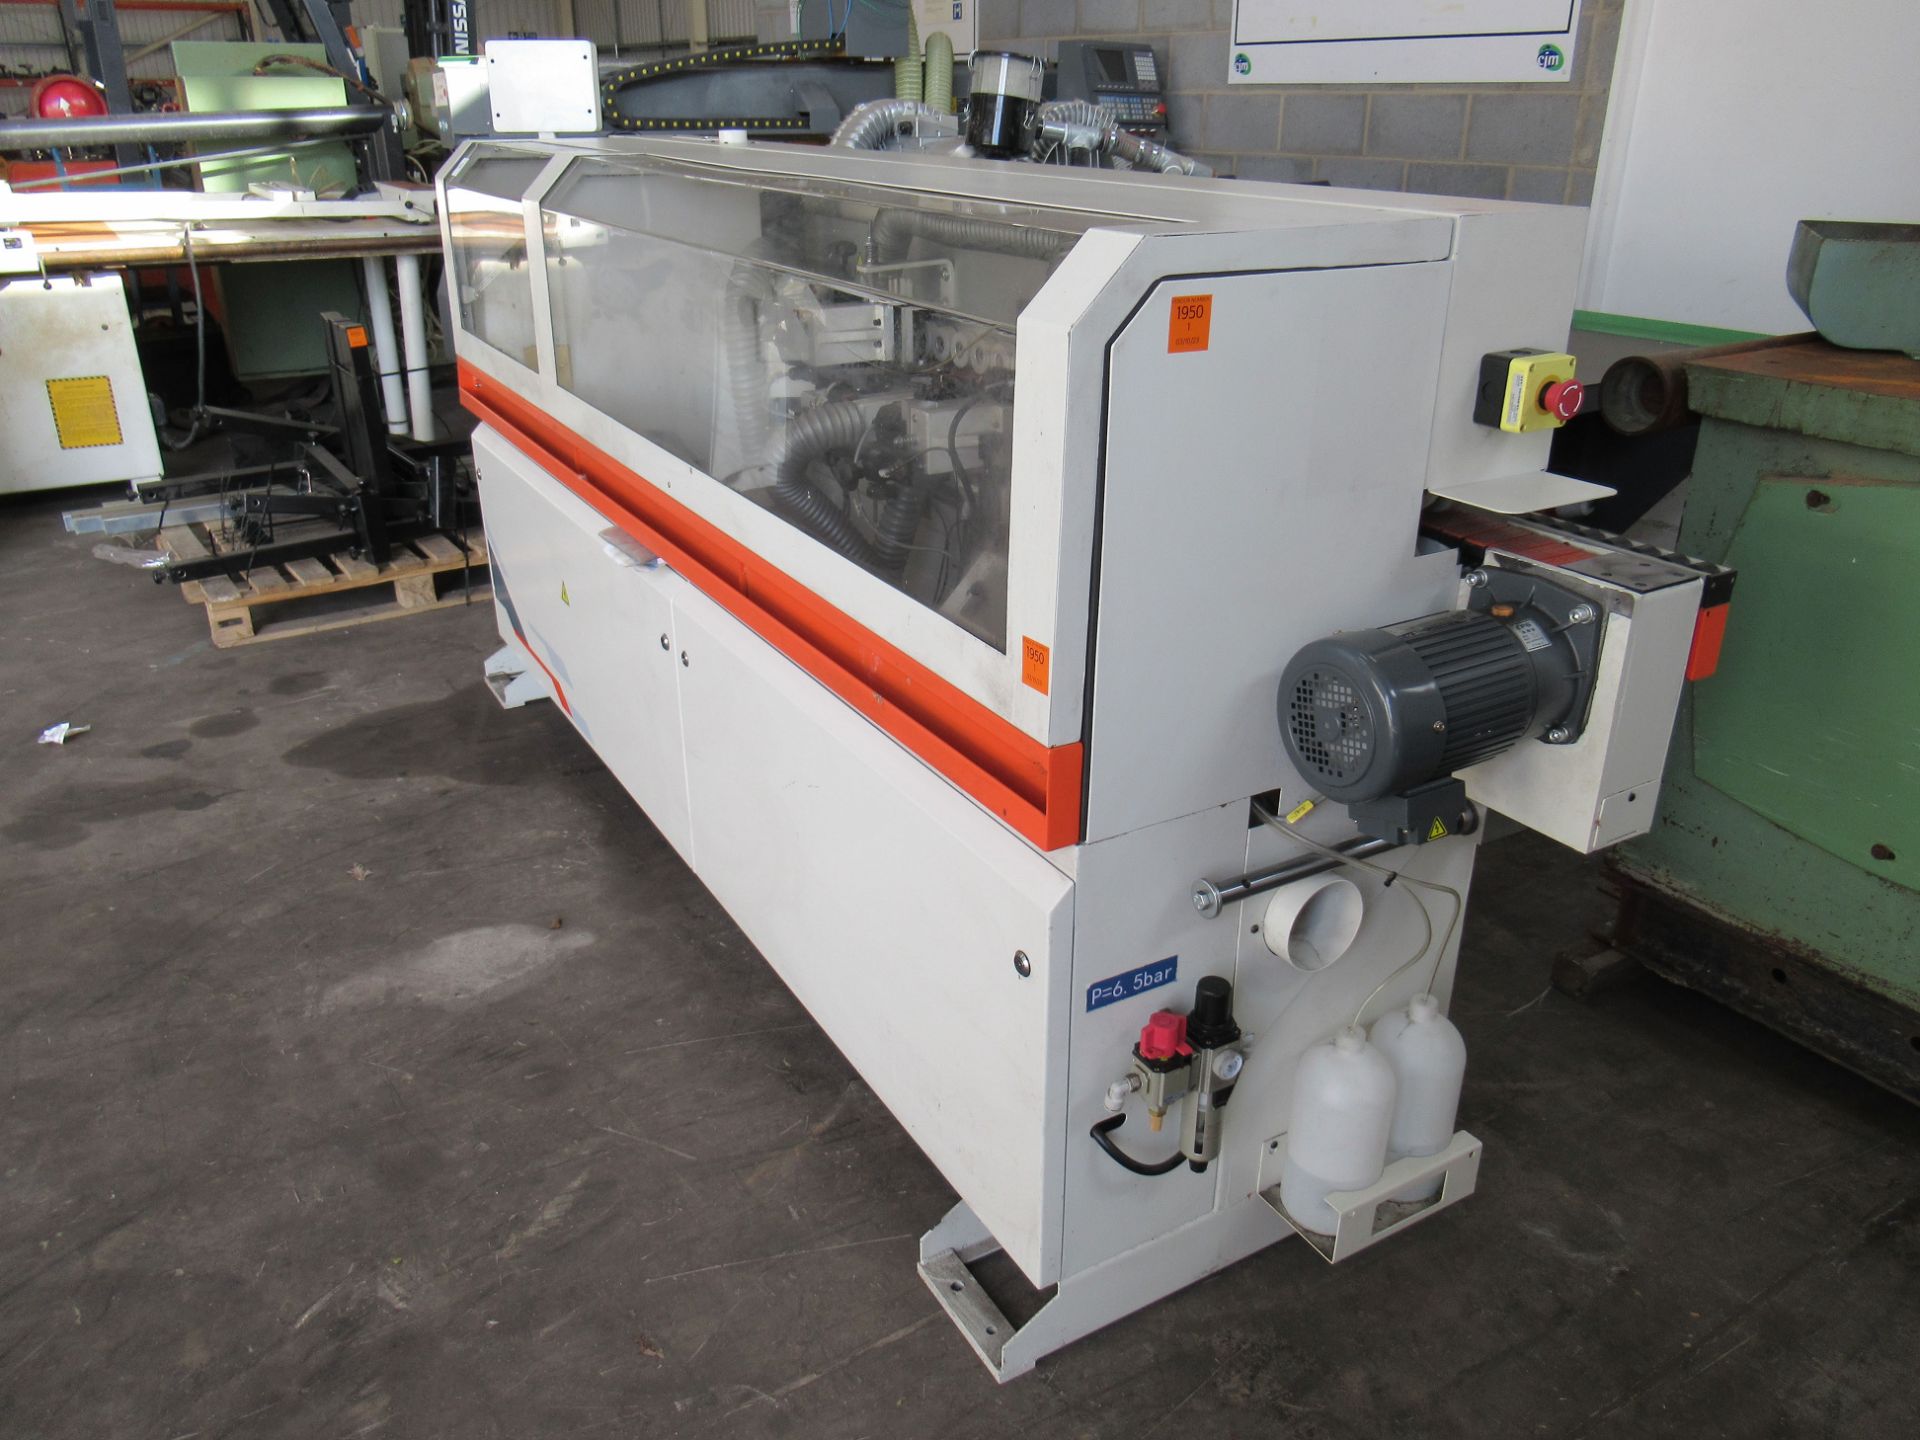 Automatic Single Sided Chain-Feed Edgebander - 3ph - Image 3 of 9